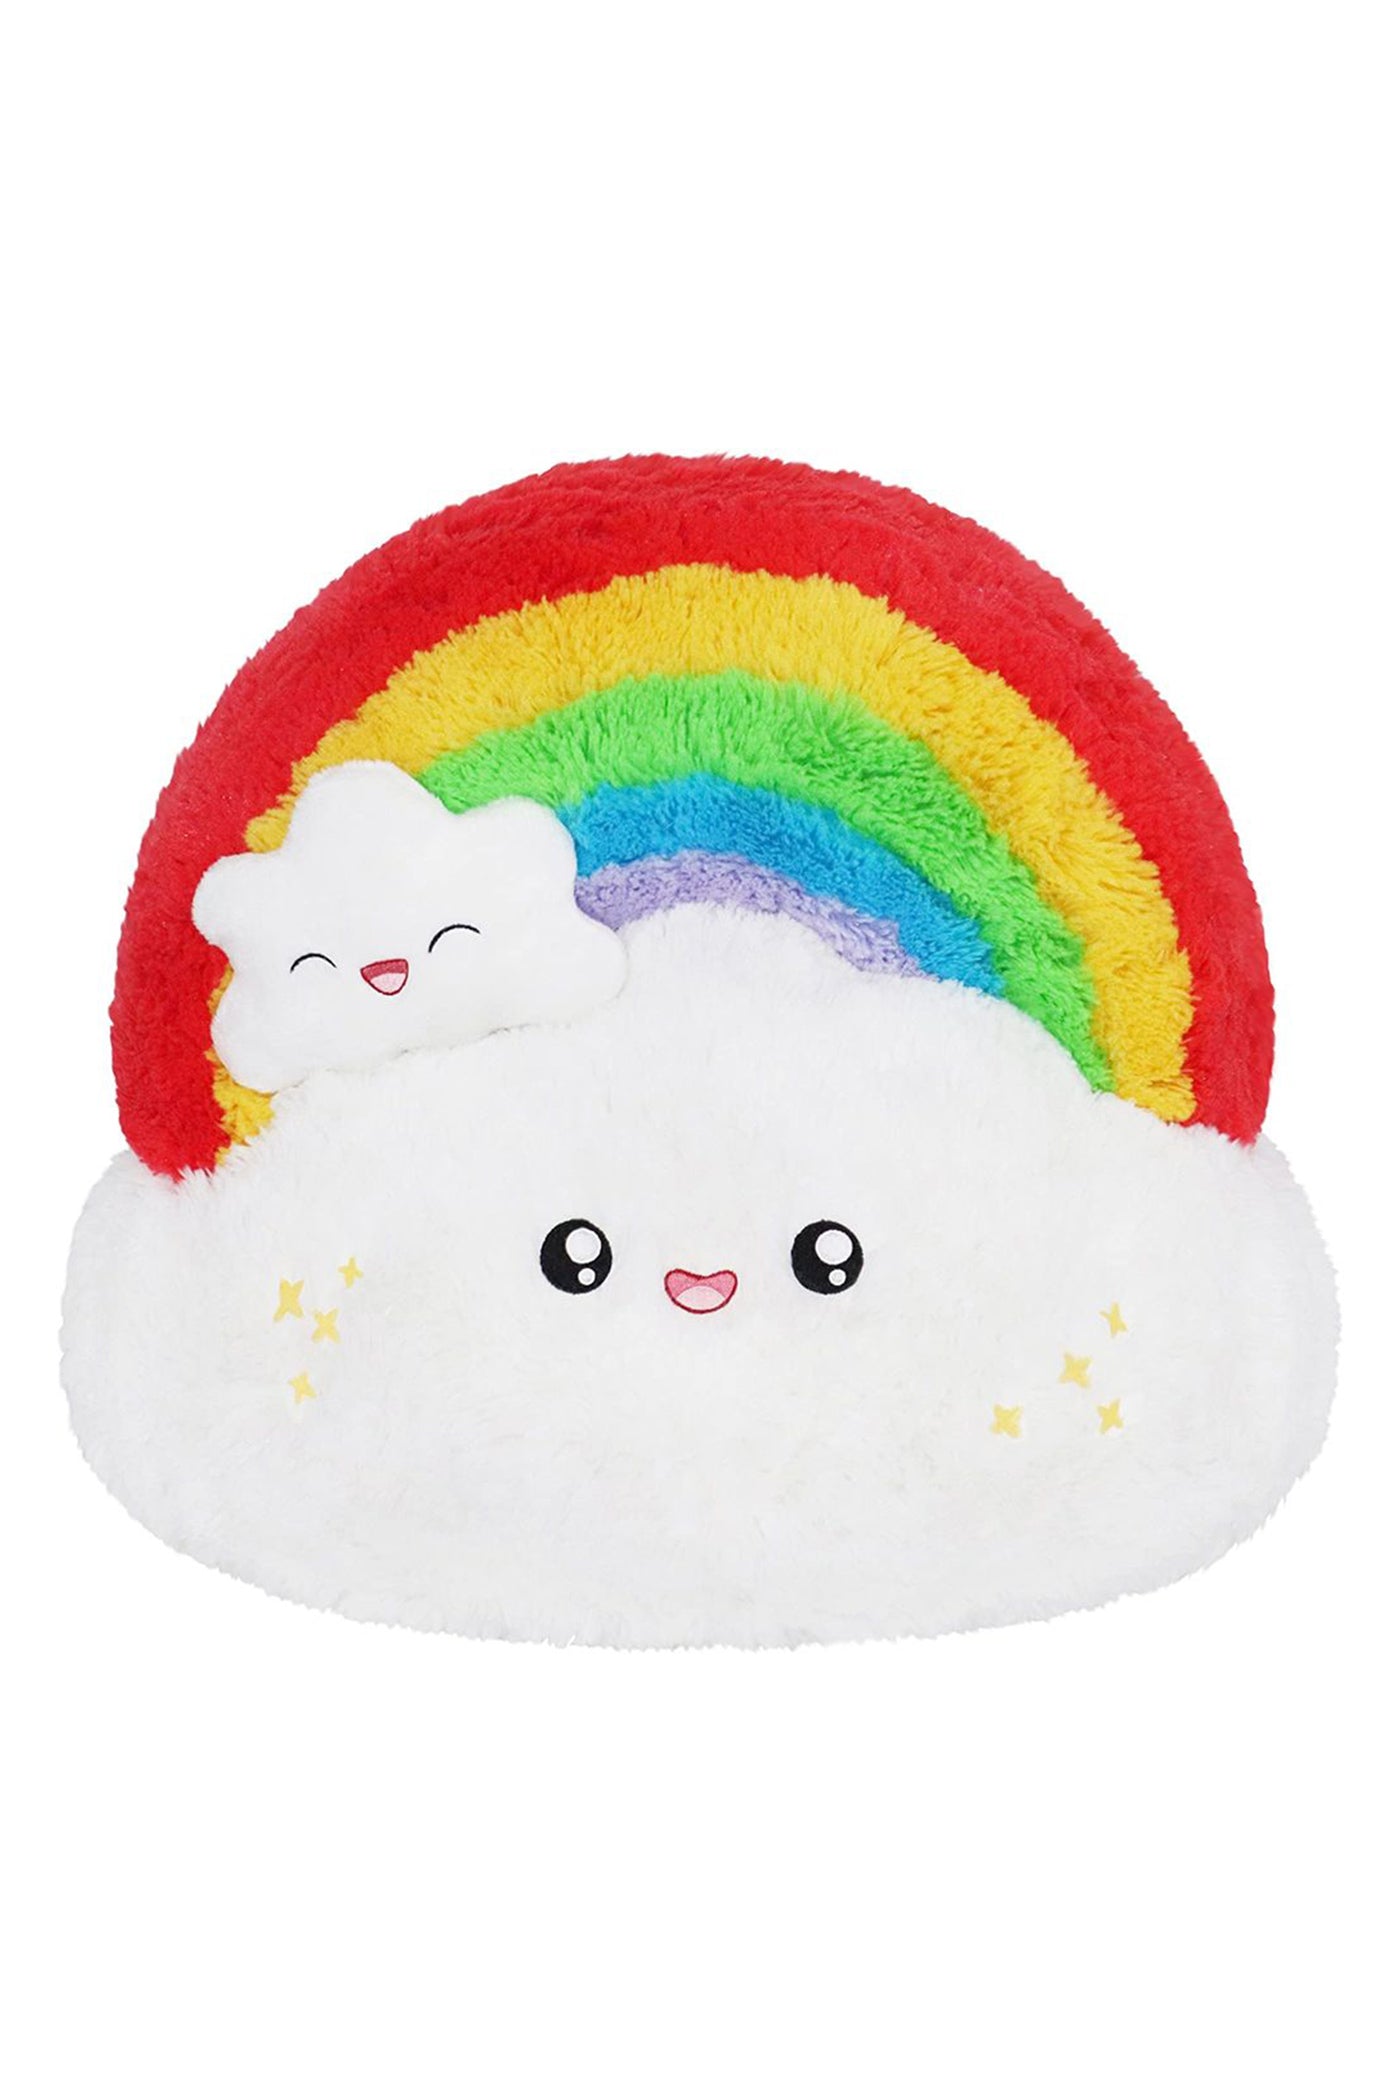 Snugglemi Snackers Rainbow by Squishable